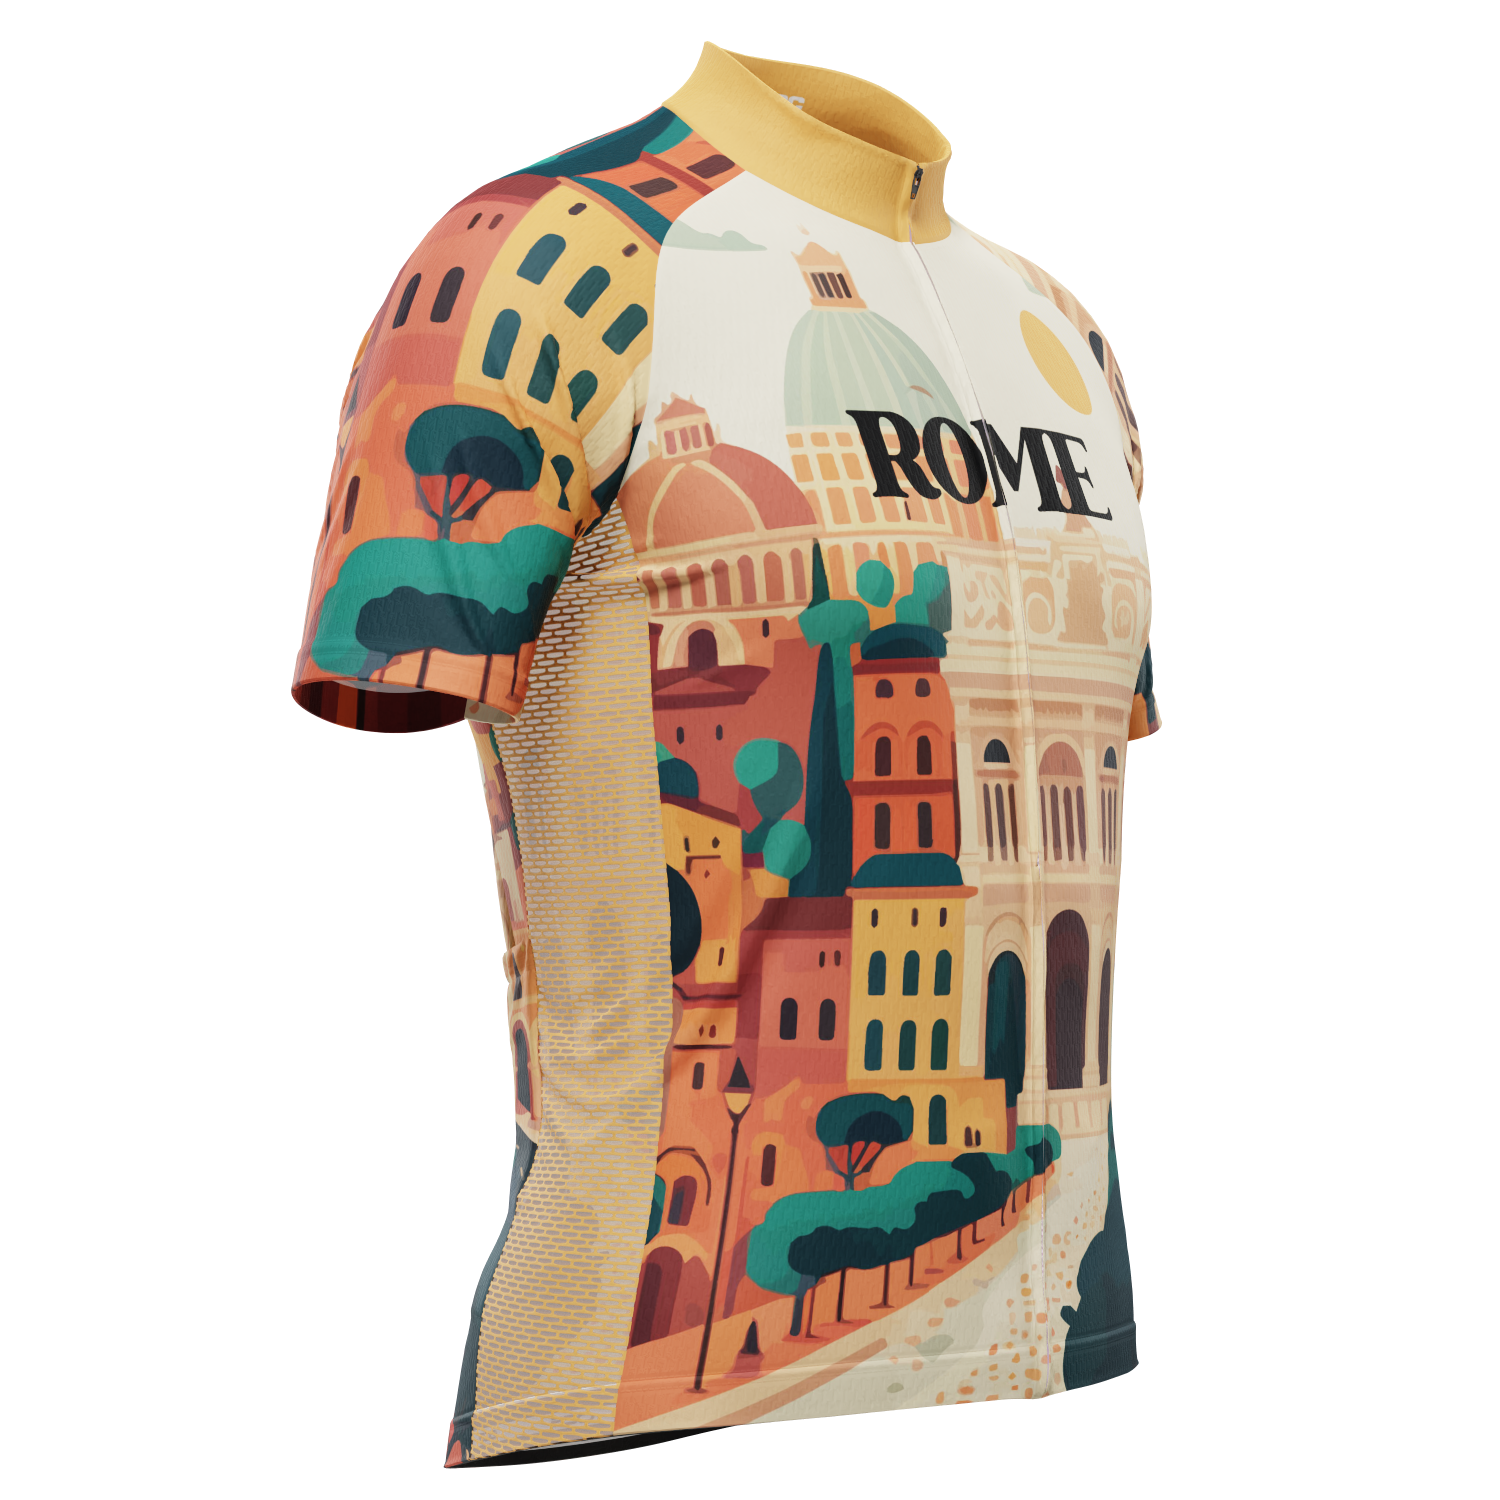 Men's Around The World - Rome Short Sleeve Cycling Jersey